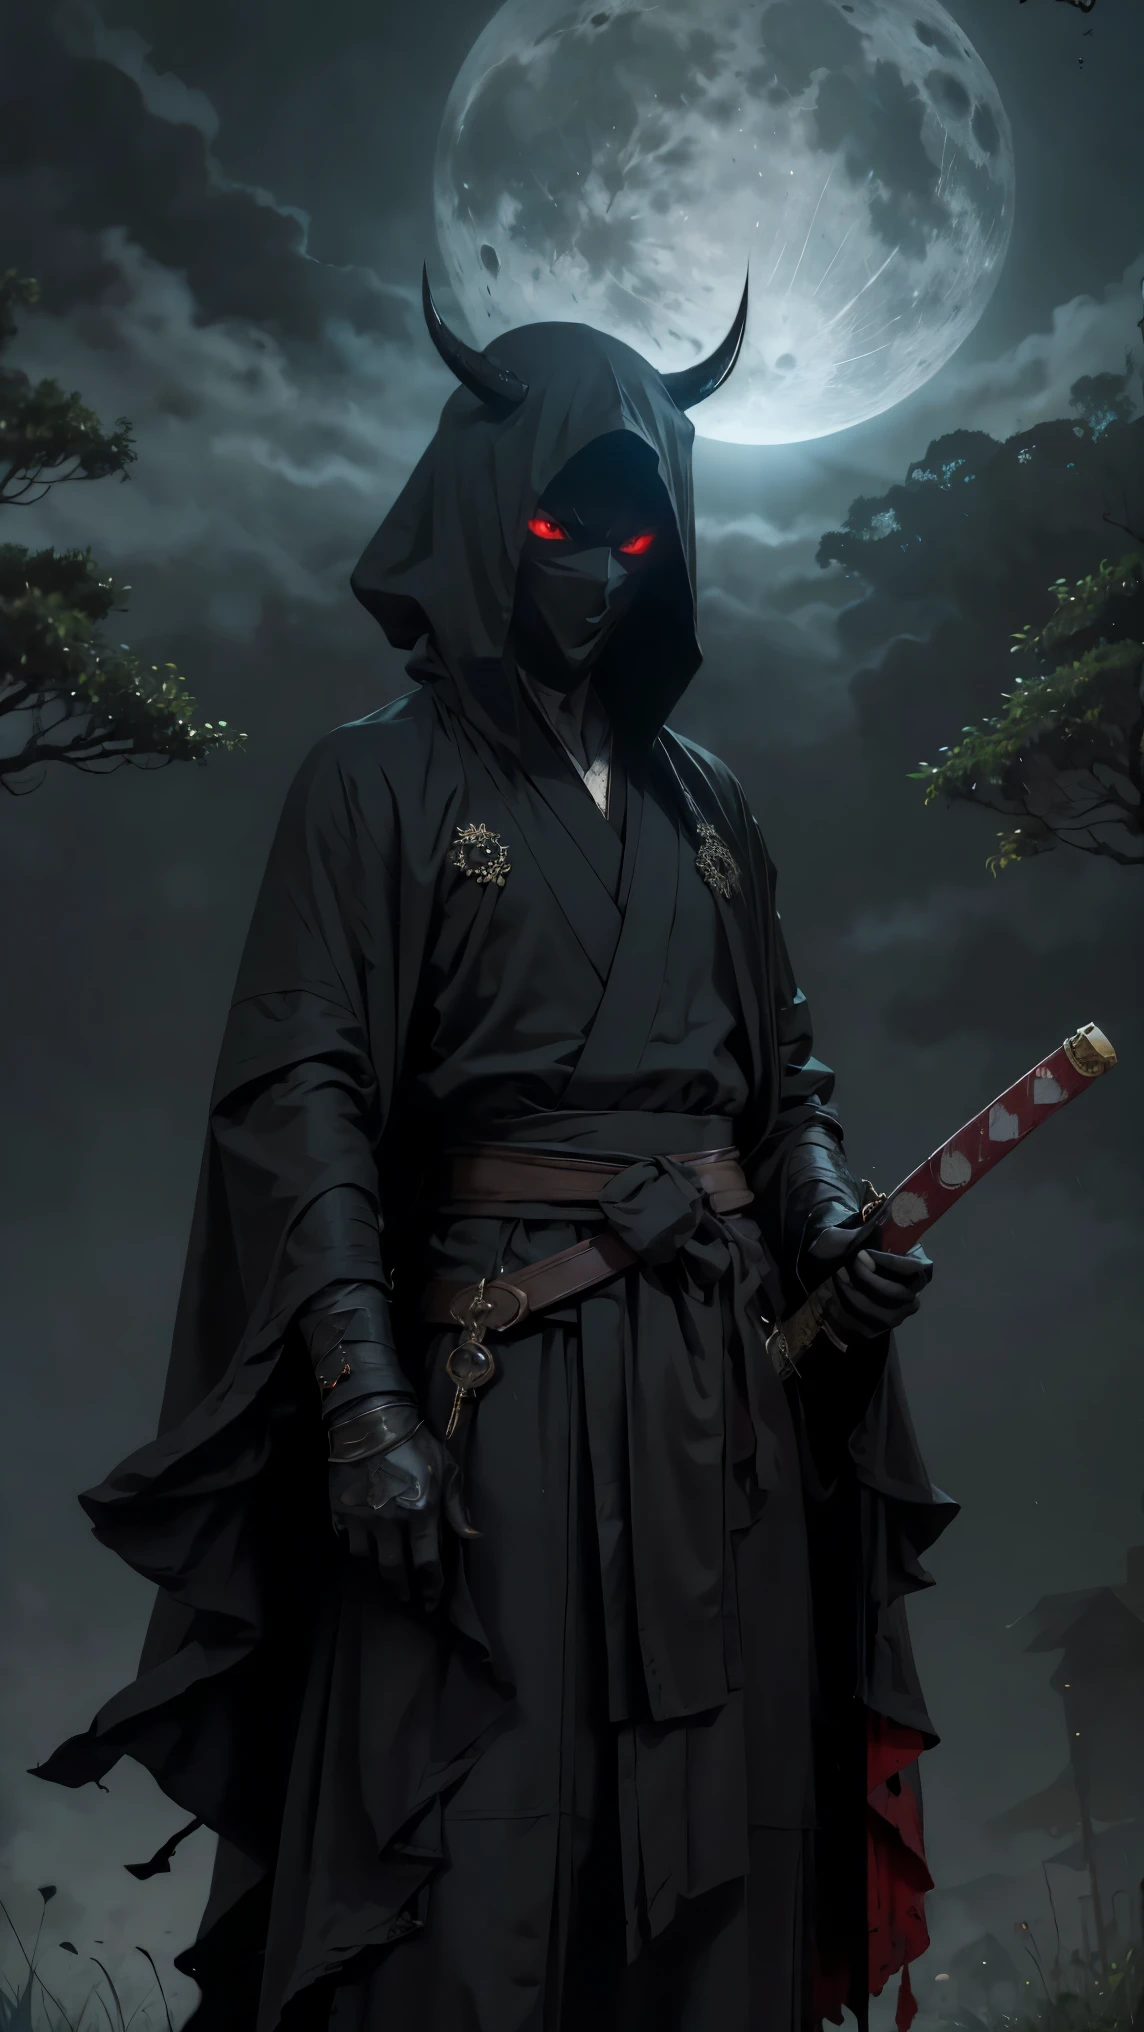 (Best Quality,ultra detailed),dark,wet,artificial raindrops falling,ancient japanese warrior standing in the rain,japanese traditional bamboo hat(fail),dense forest landscape,majestic and serene nature,full moon shining brightly in the night sky,black kimono with fluorescent red stripes that glow in the moonlight,samurai sword sharpened and drawn(katana),(detailed horned mask:1.2),(dark,devil) atmosphere,(Mysterious,ominous,sandy) texture,1 demonic character,sharp teeth,bright red eyes,long sharp horns,pale skin,black claws,overgrown dark forest,ominous moonlight,dense fog,creepy atmosphere,blood red color scheme,haunting shadows,spooky fog,horror genre,nightmarish,dynamic lighting,High contrast,ethereal feeling,vivid colors